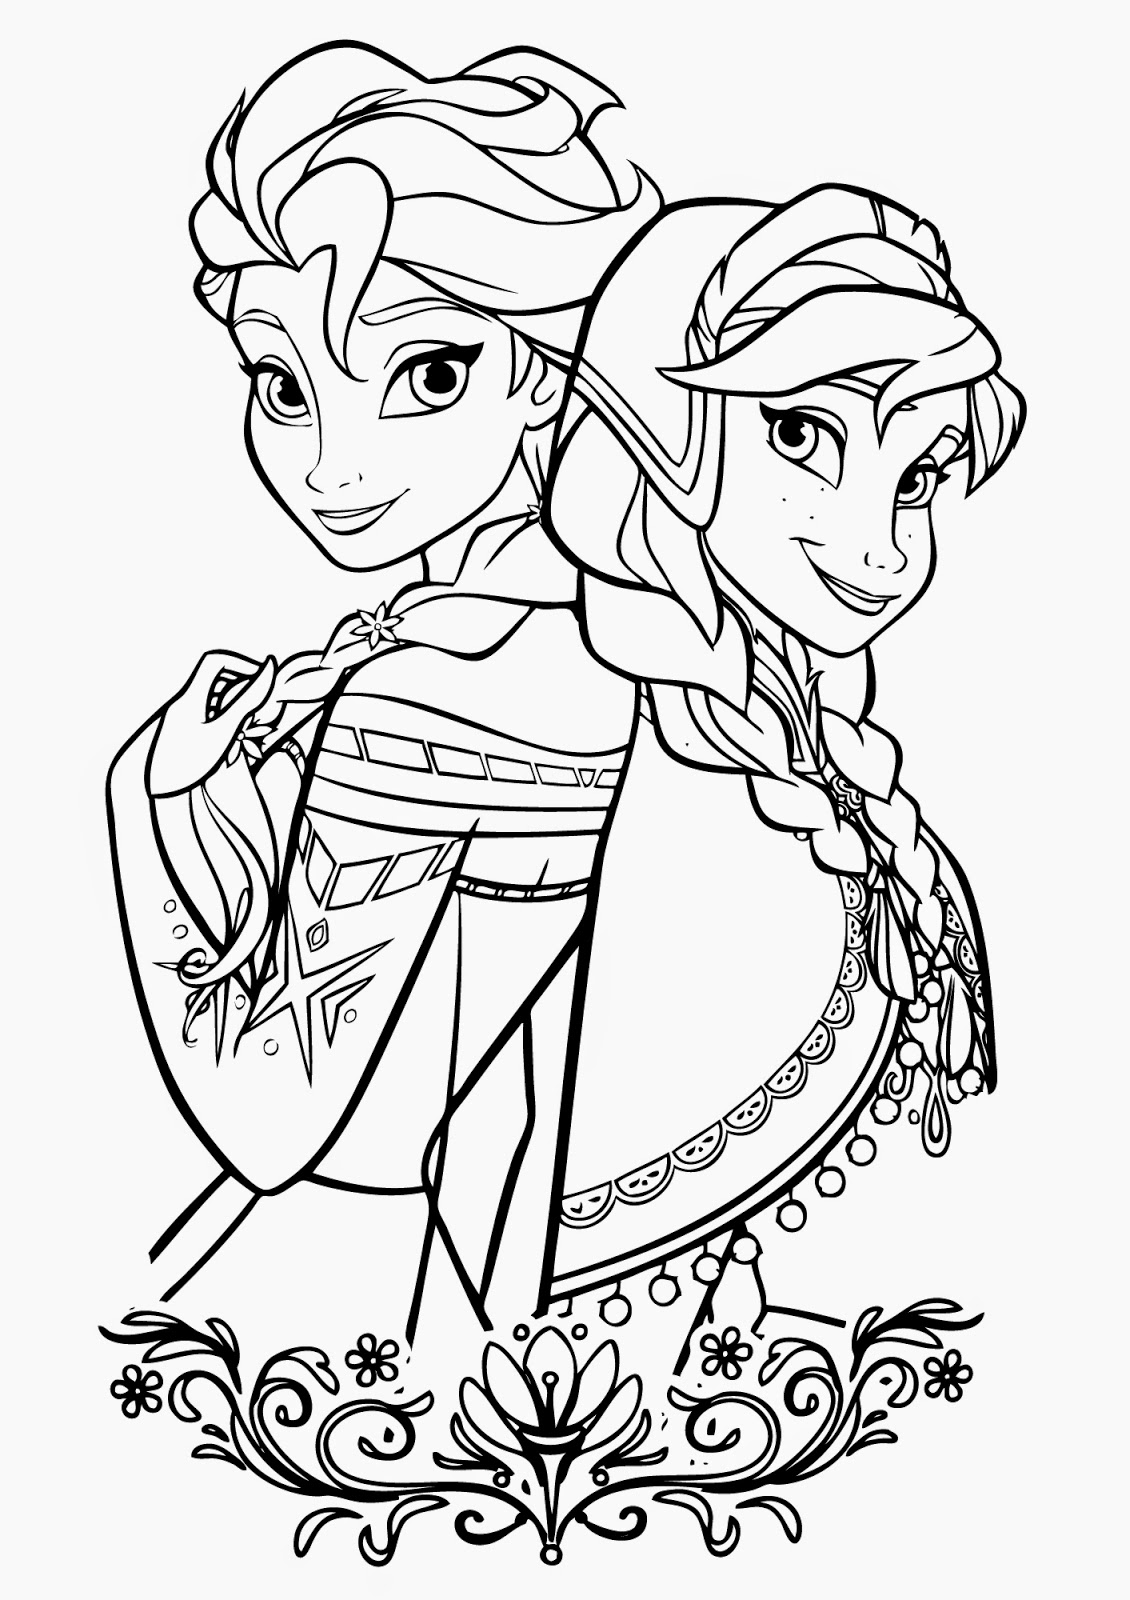 Download Free Printable Elsa Coloring Pages for Kids - Best ...